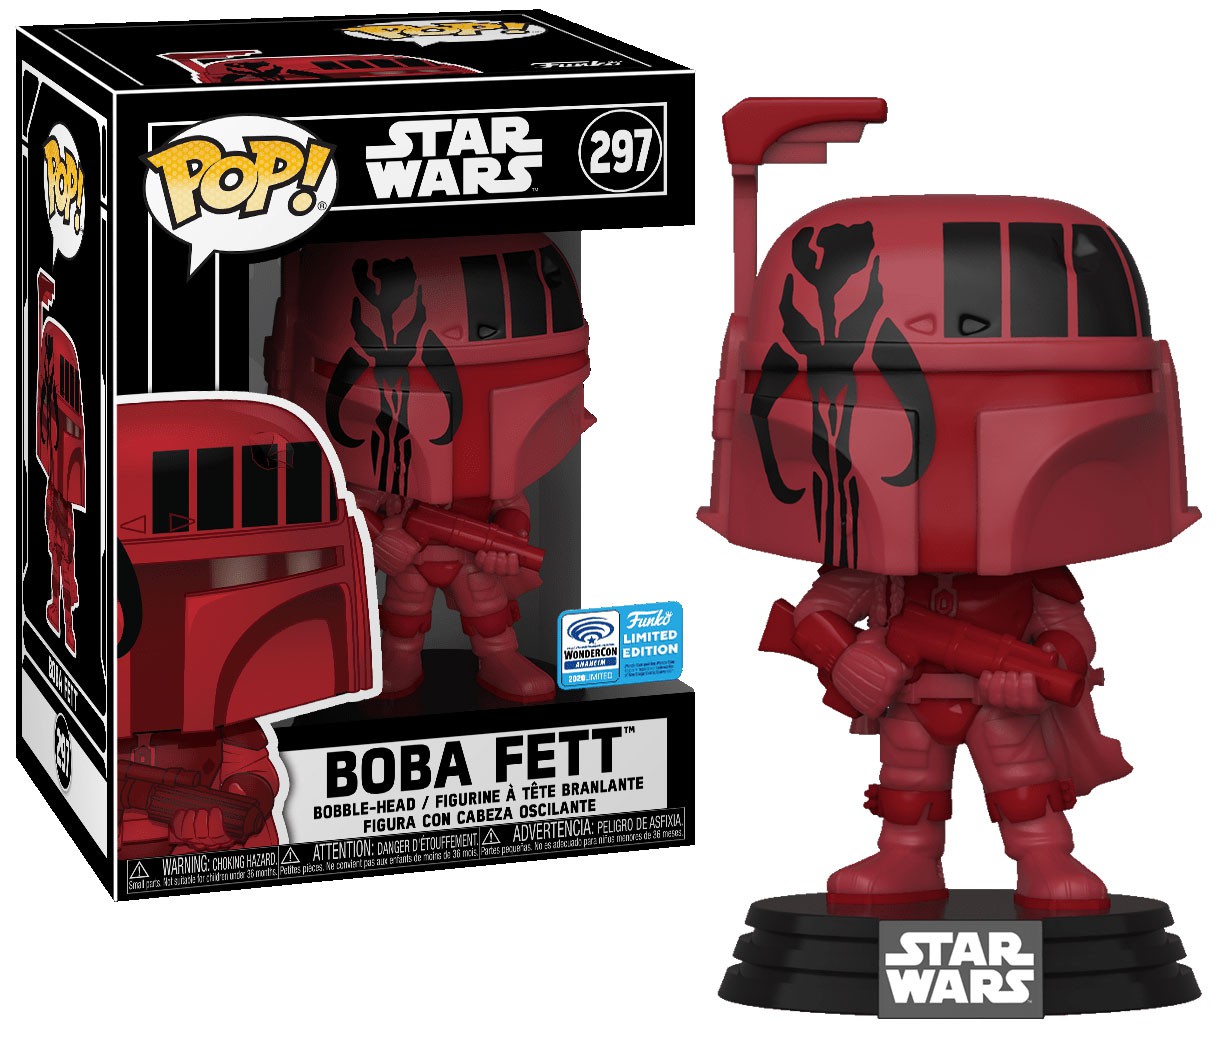 POP! Star Wars: 297 SW, Boba Fett (Red Futura) Exclusive - image 1 of 6